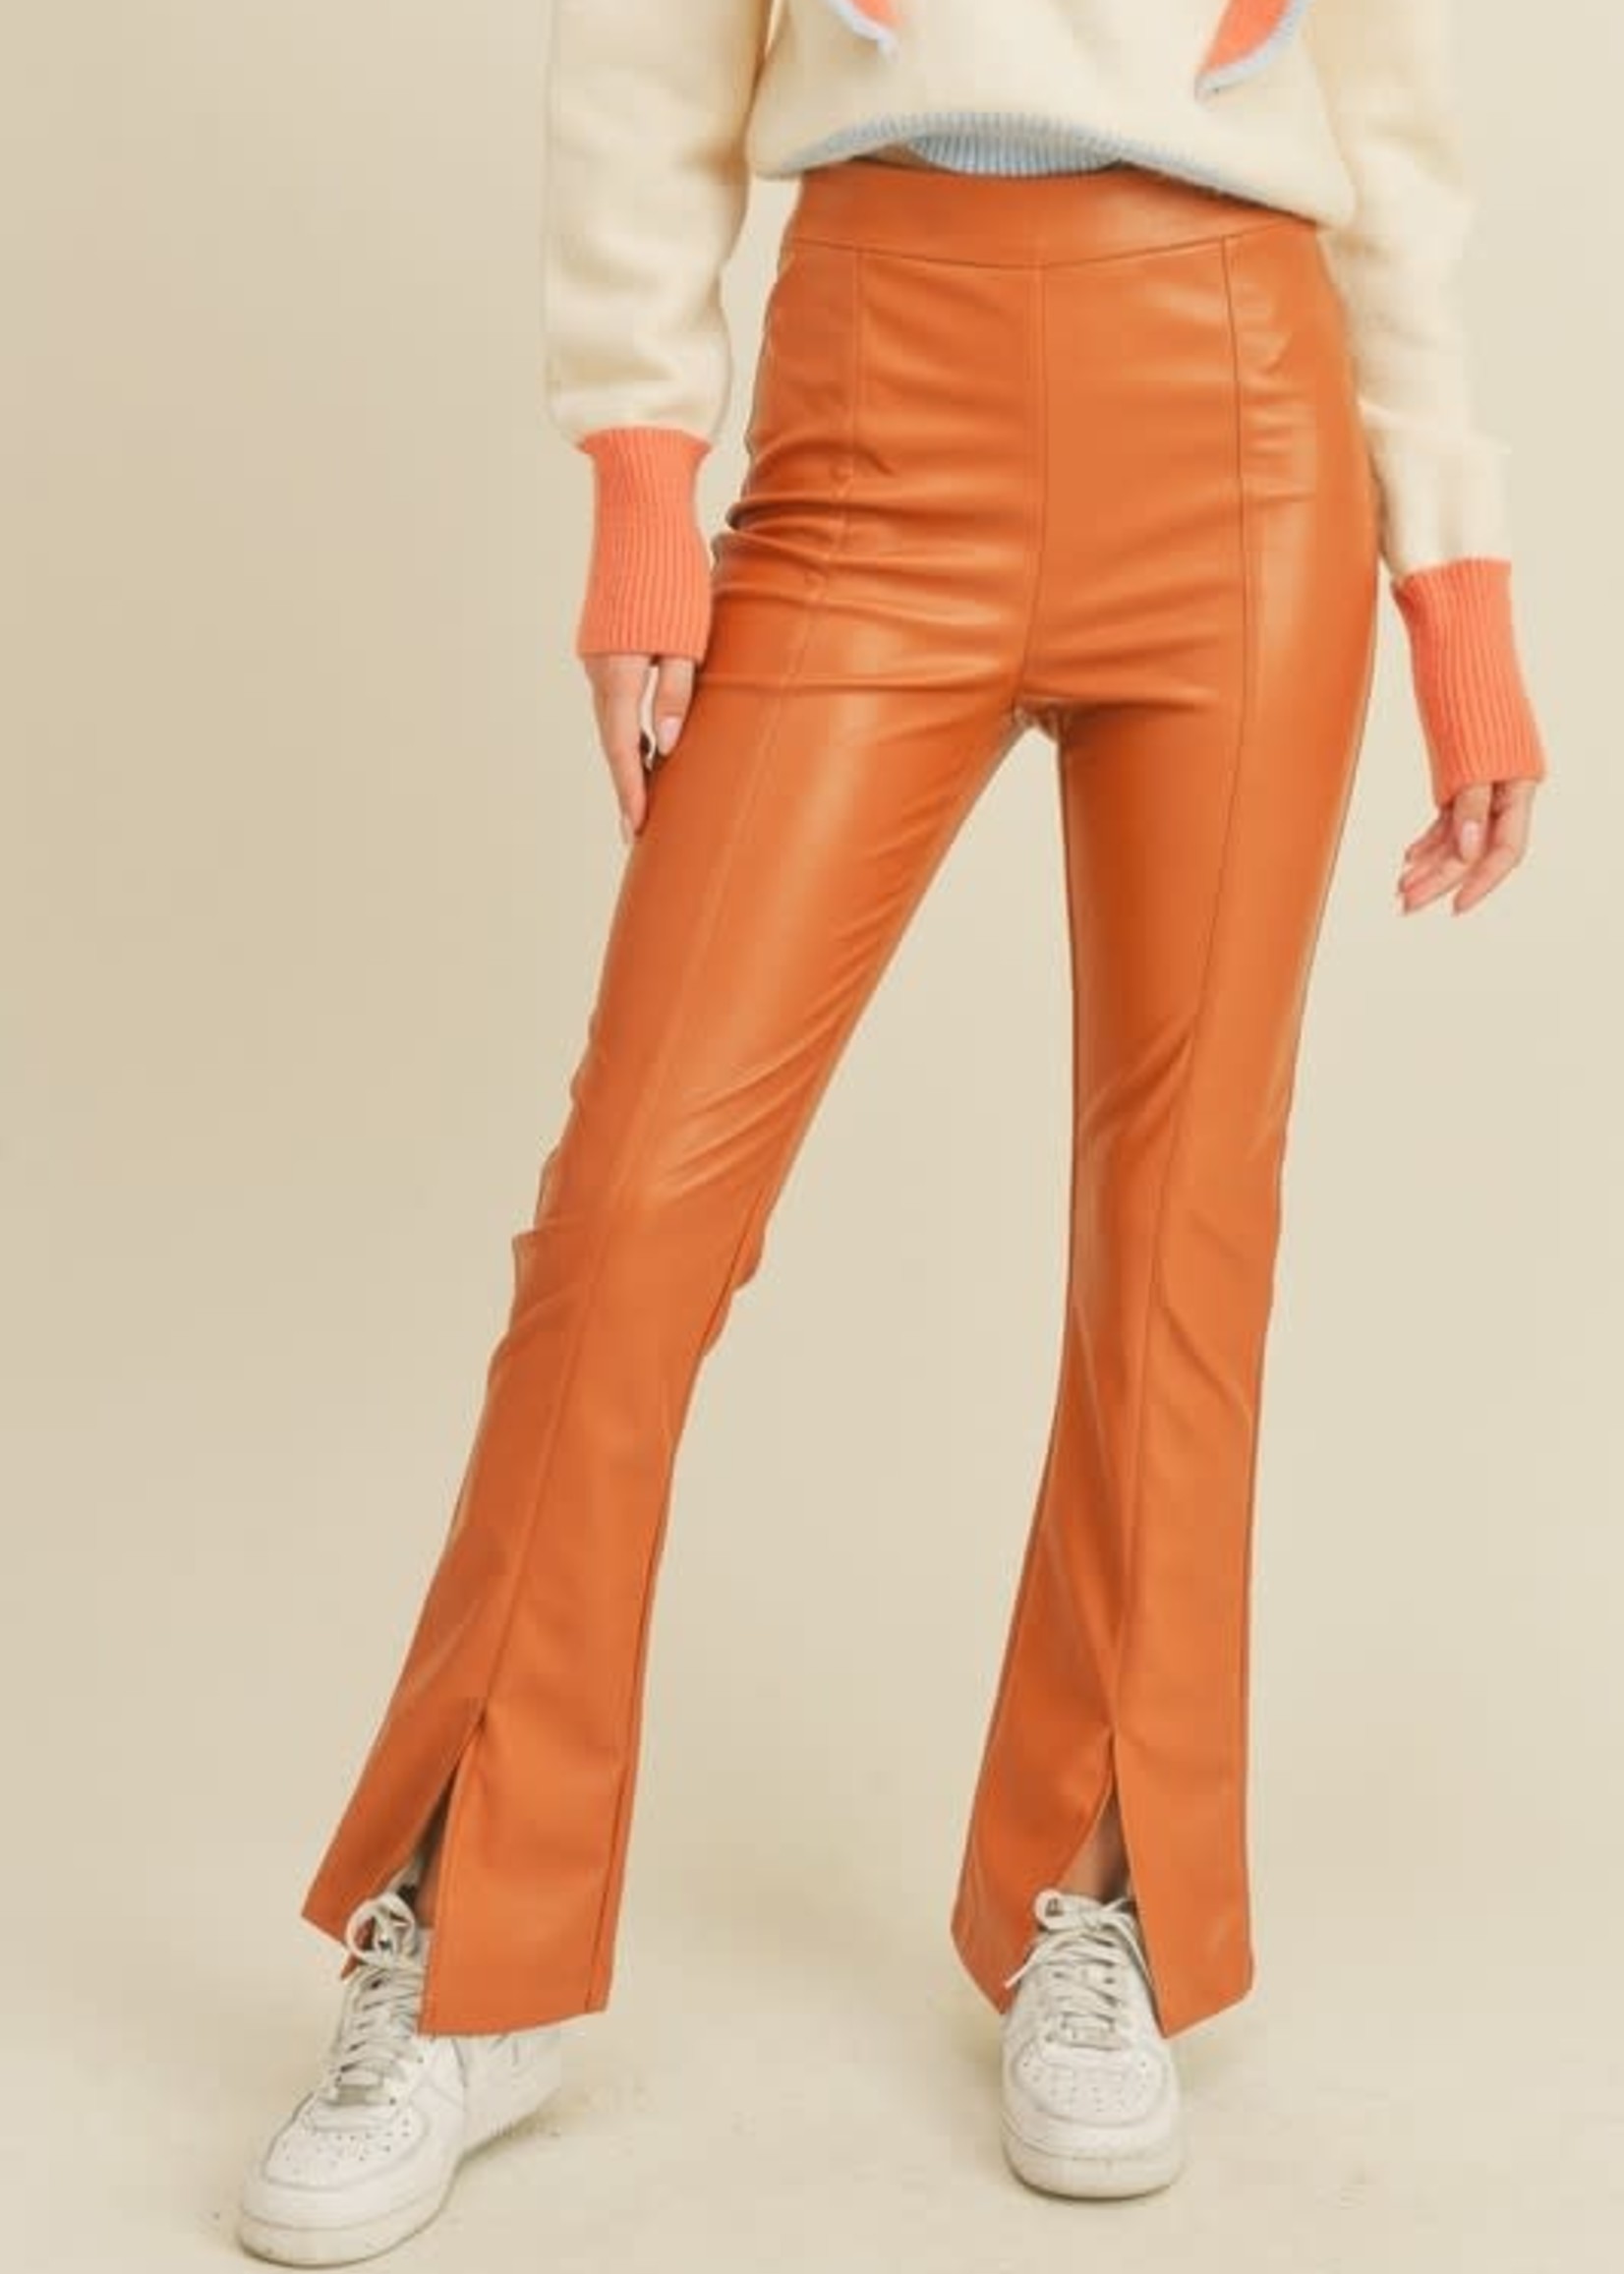 Ginger Spice Leather Pants